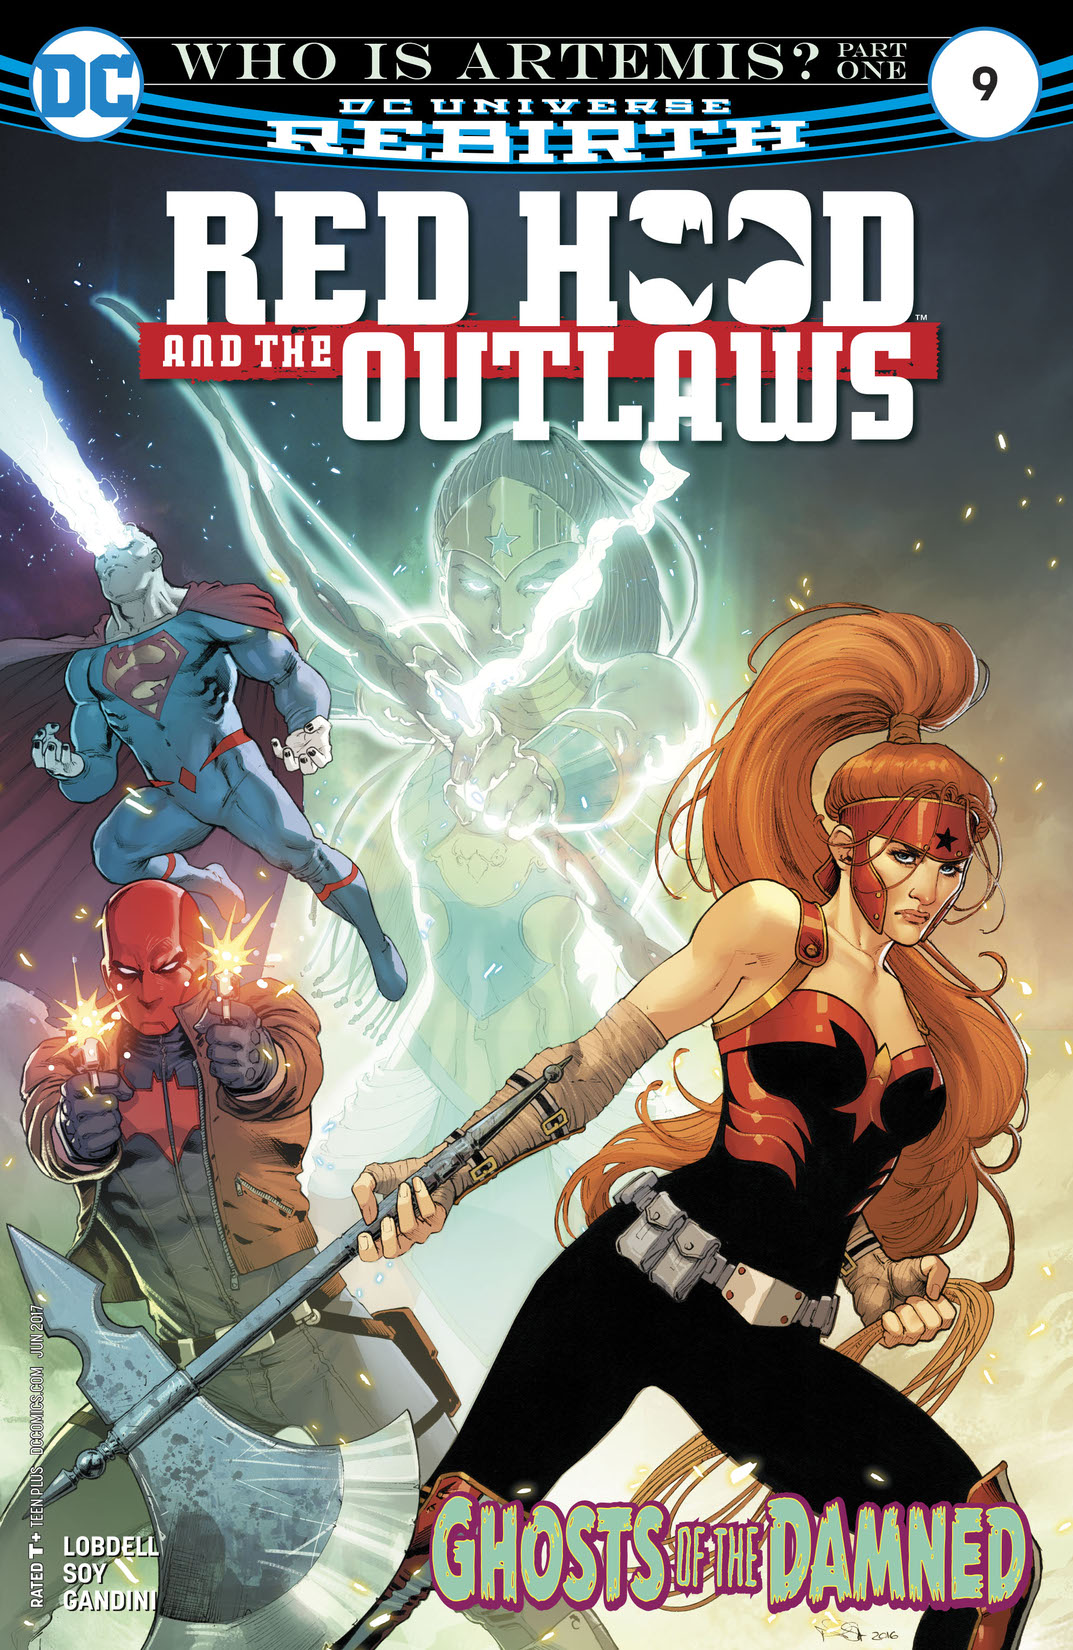 Red Hood and the Outlaws (2016-) #9 preview images